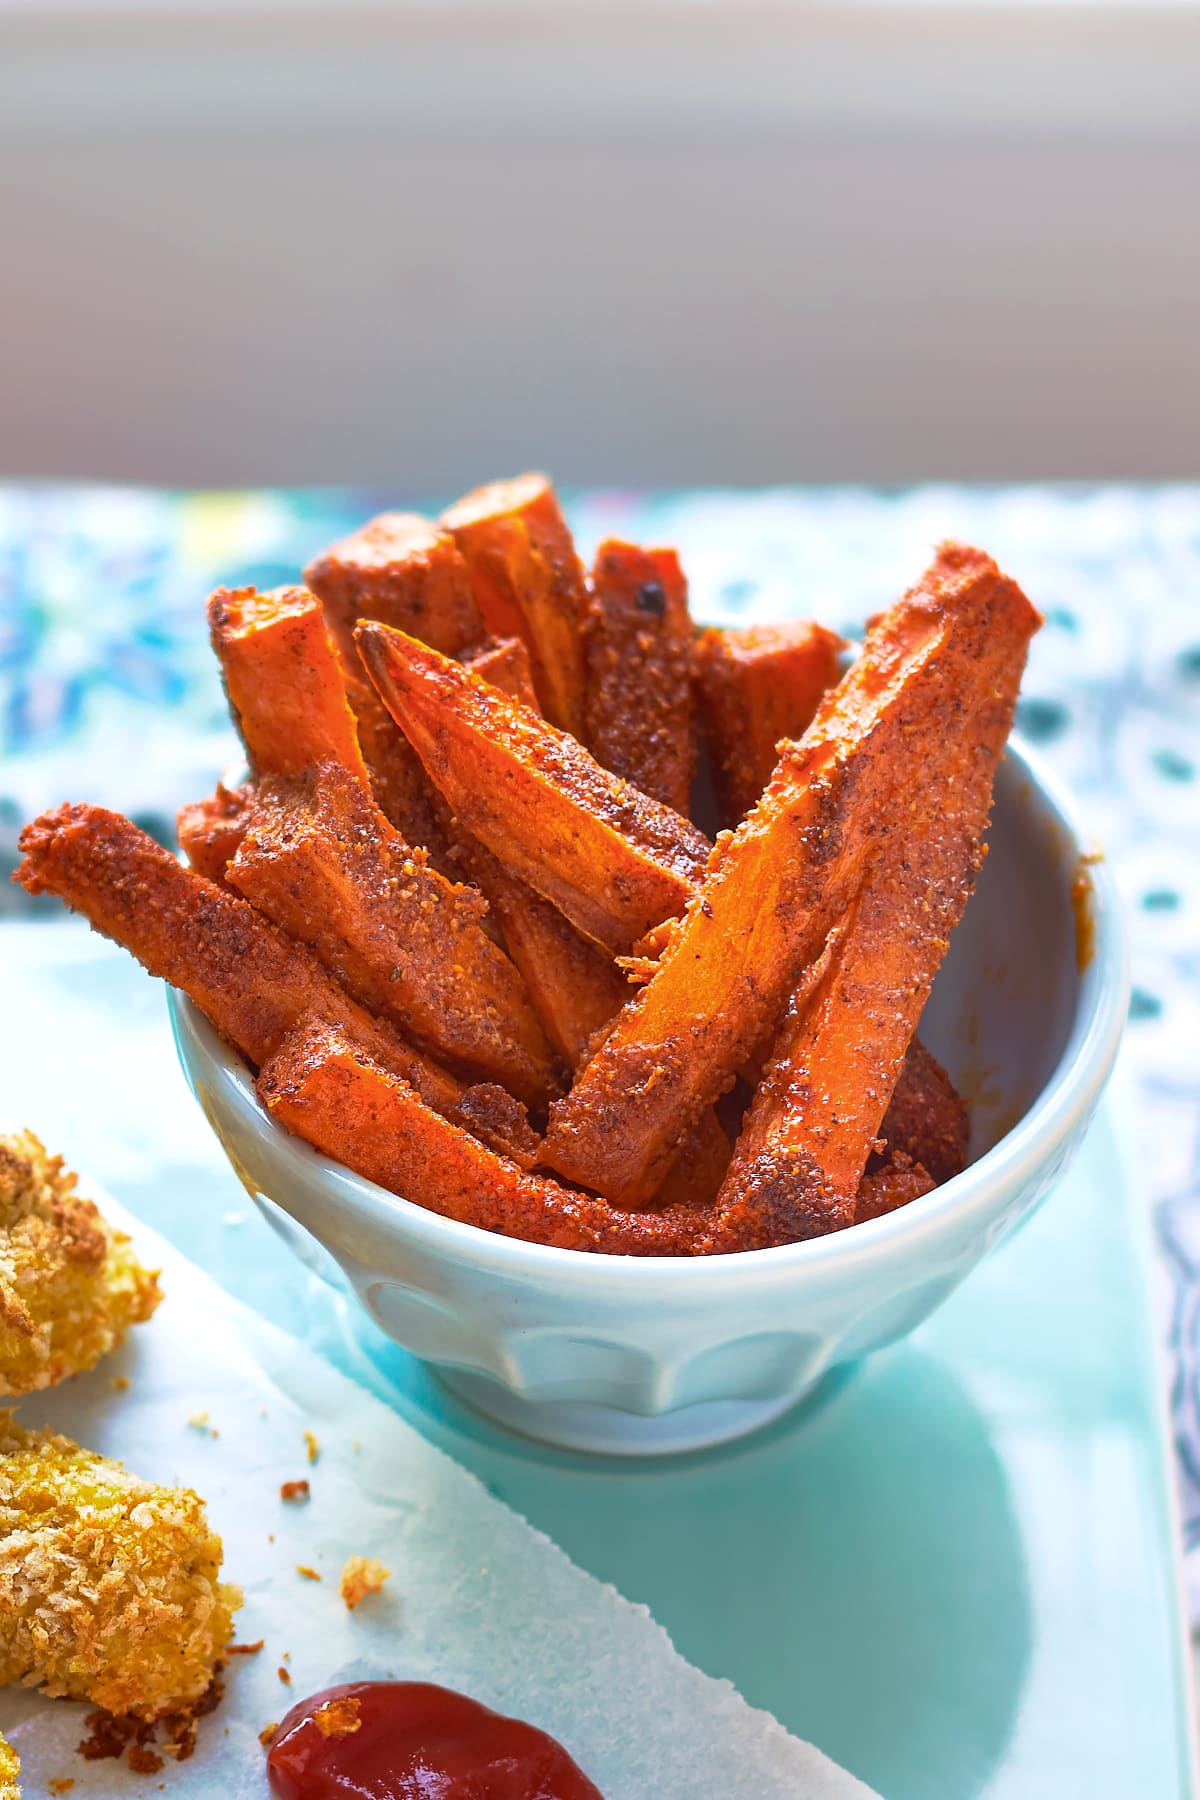 Sweet potato chips in a white bowl on a pale blue tray. Fish fingers are shown to the side.